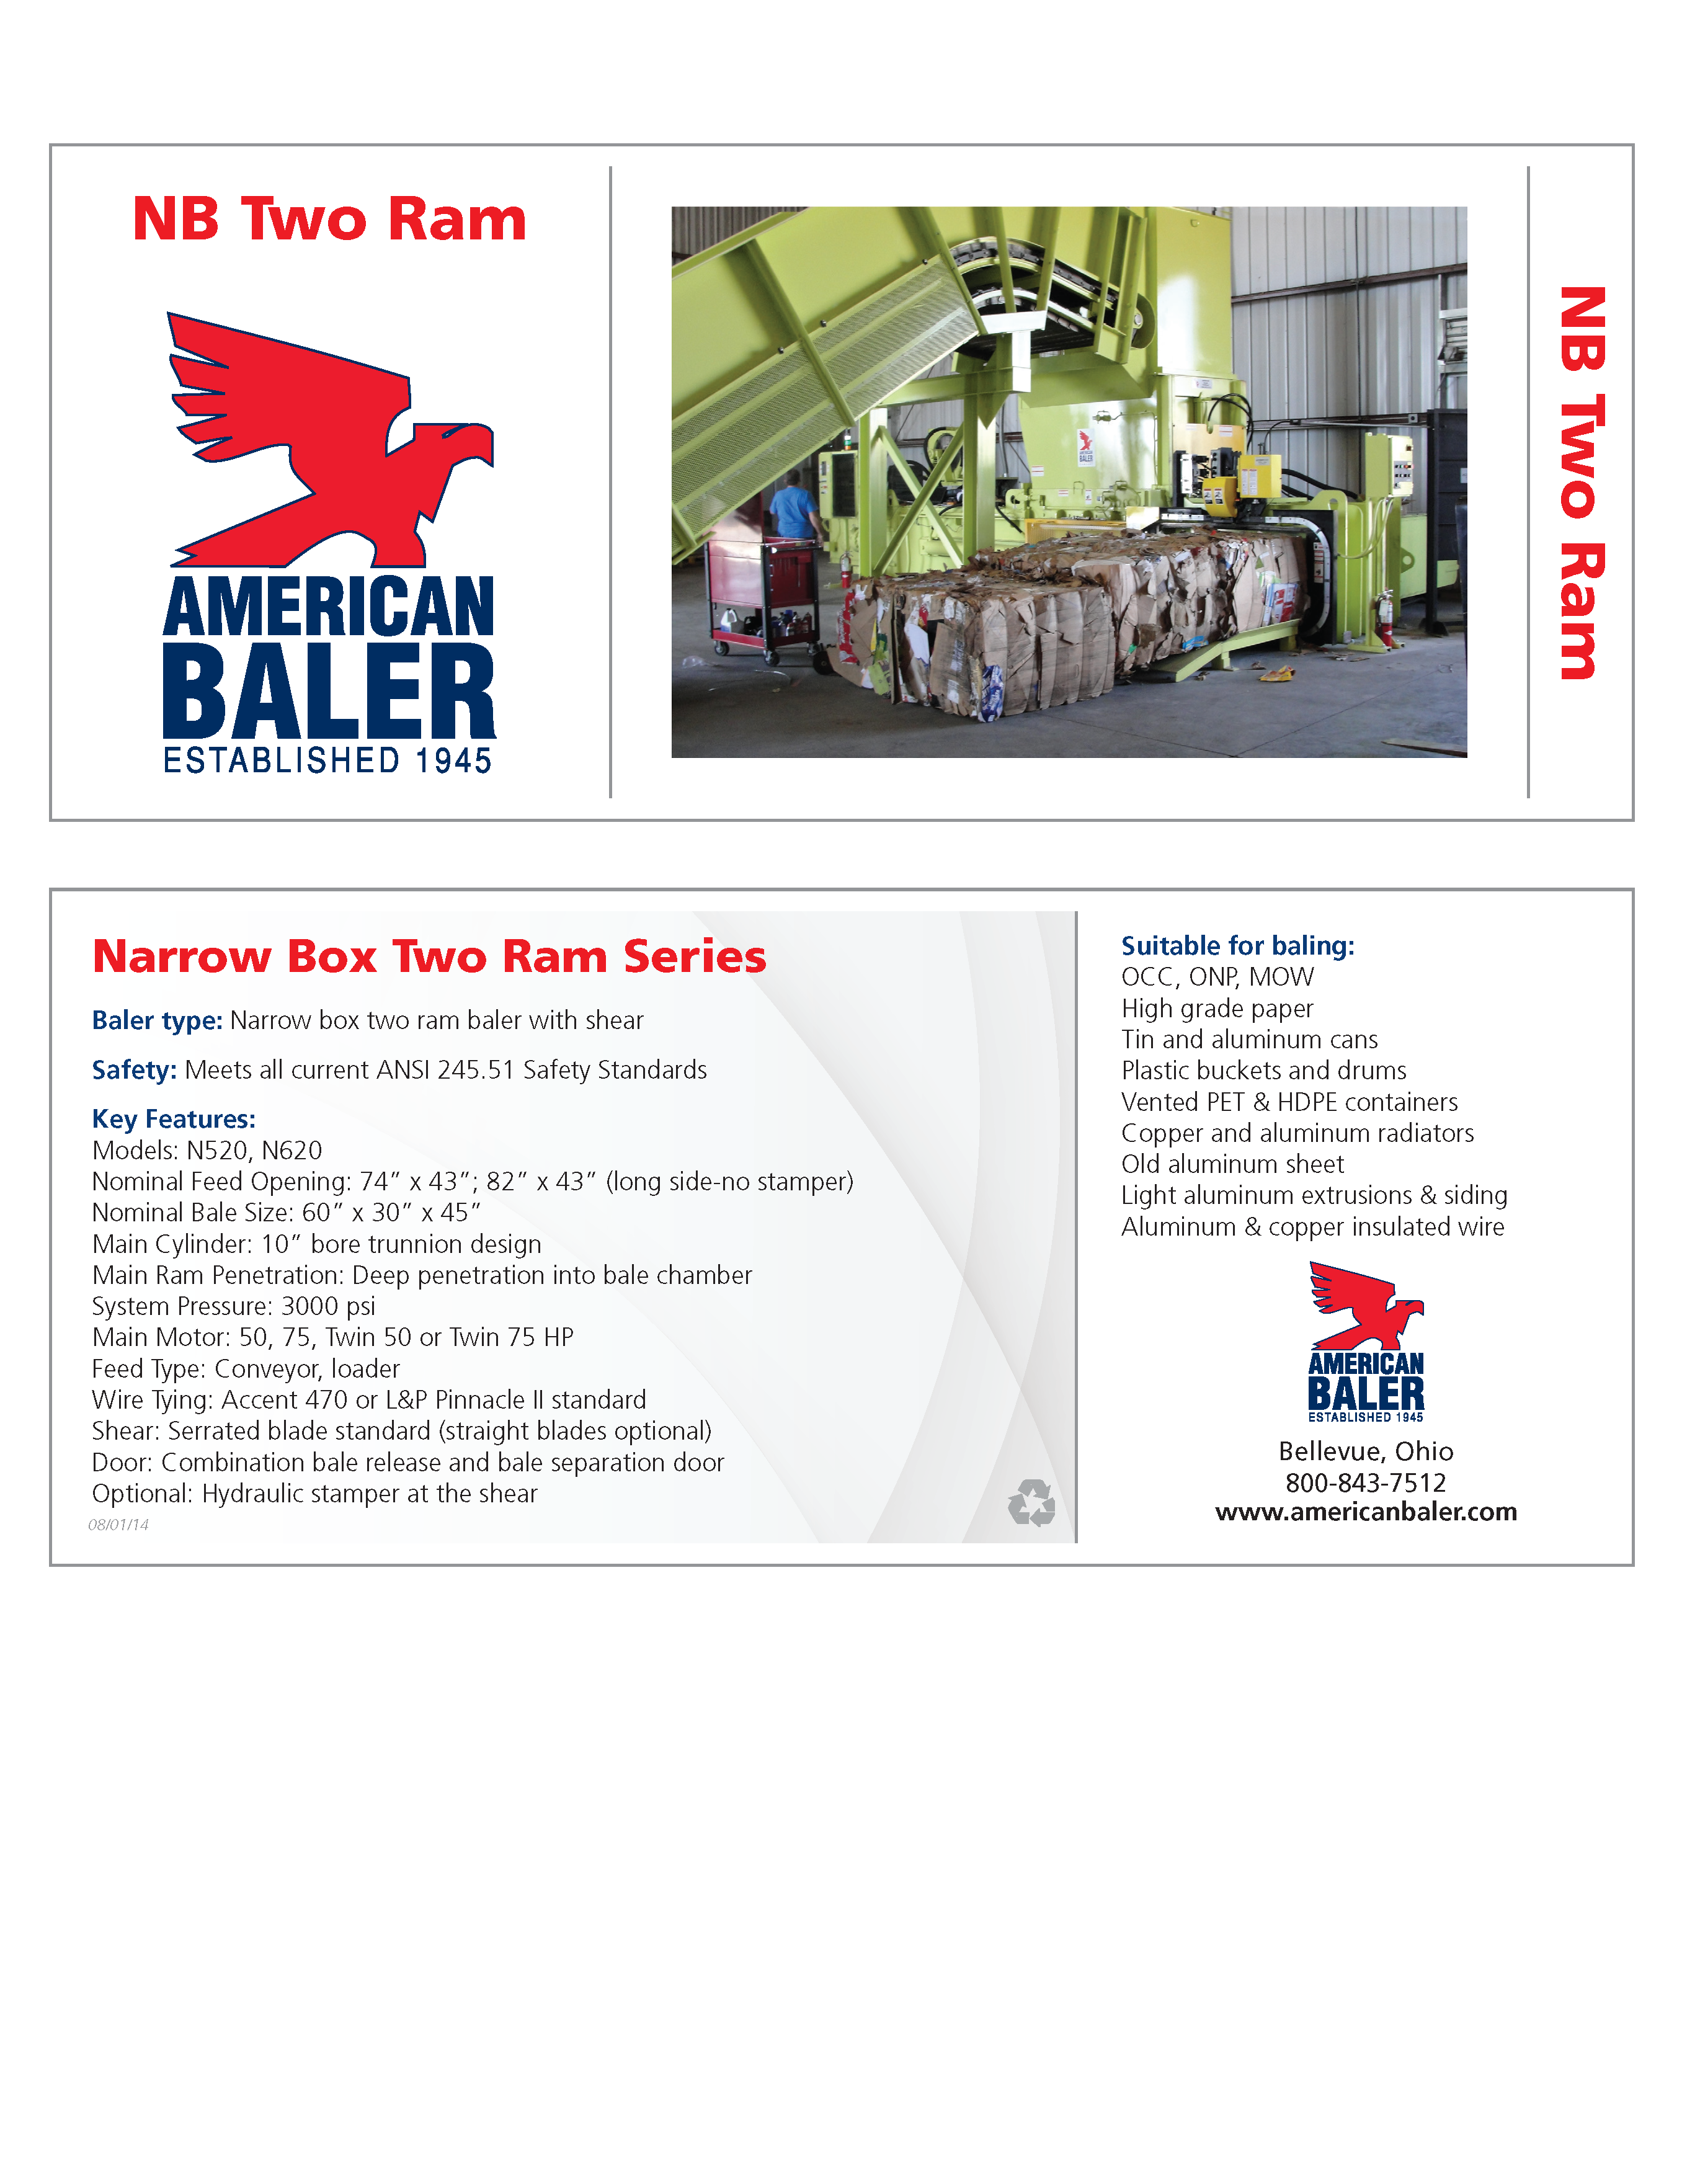 Learn more about the NB Series Balers in the American Baler Brochure